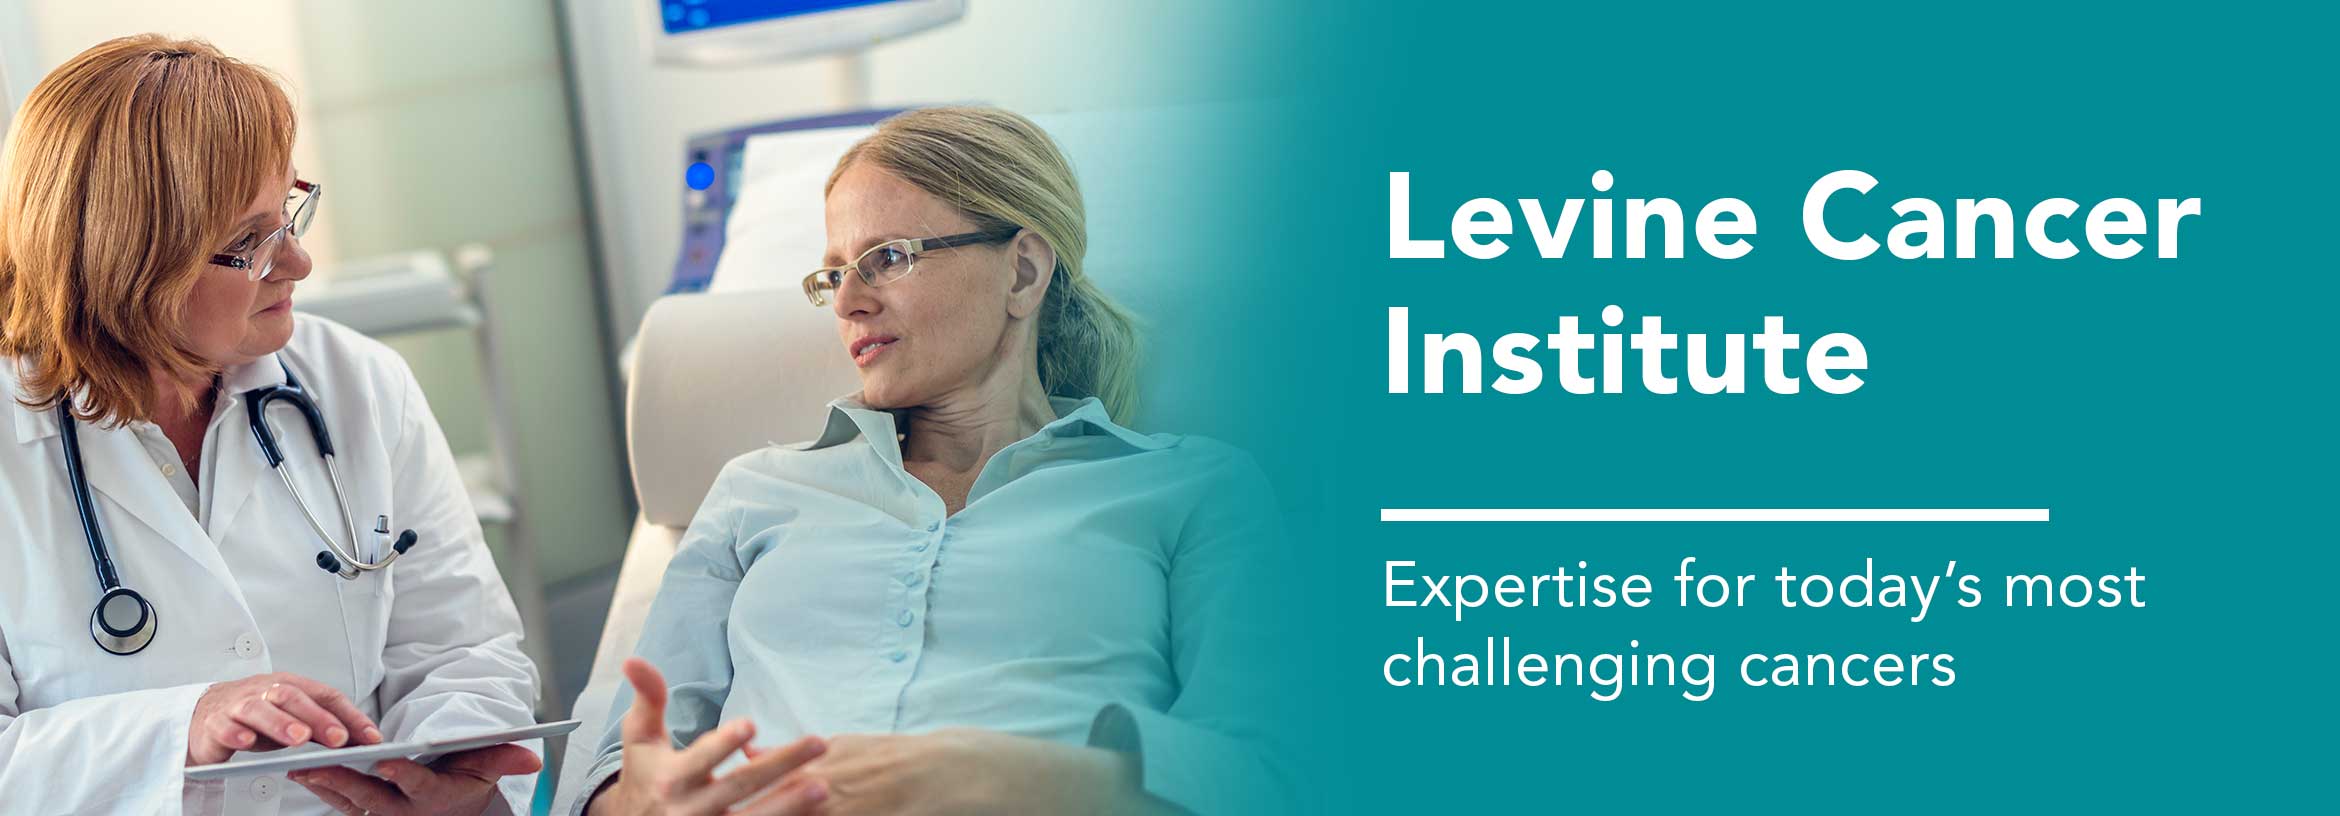 Leading Cancer Specialists | Levine Cancer Institute